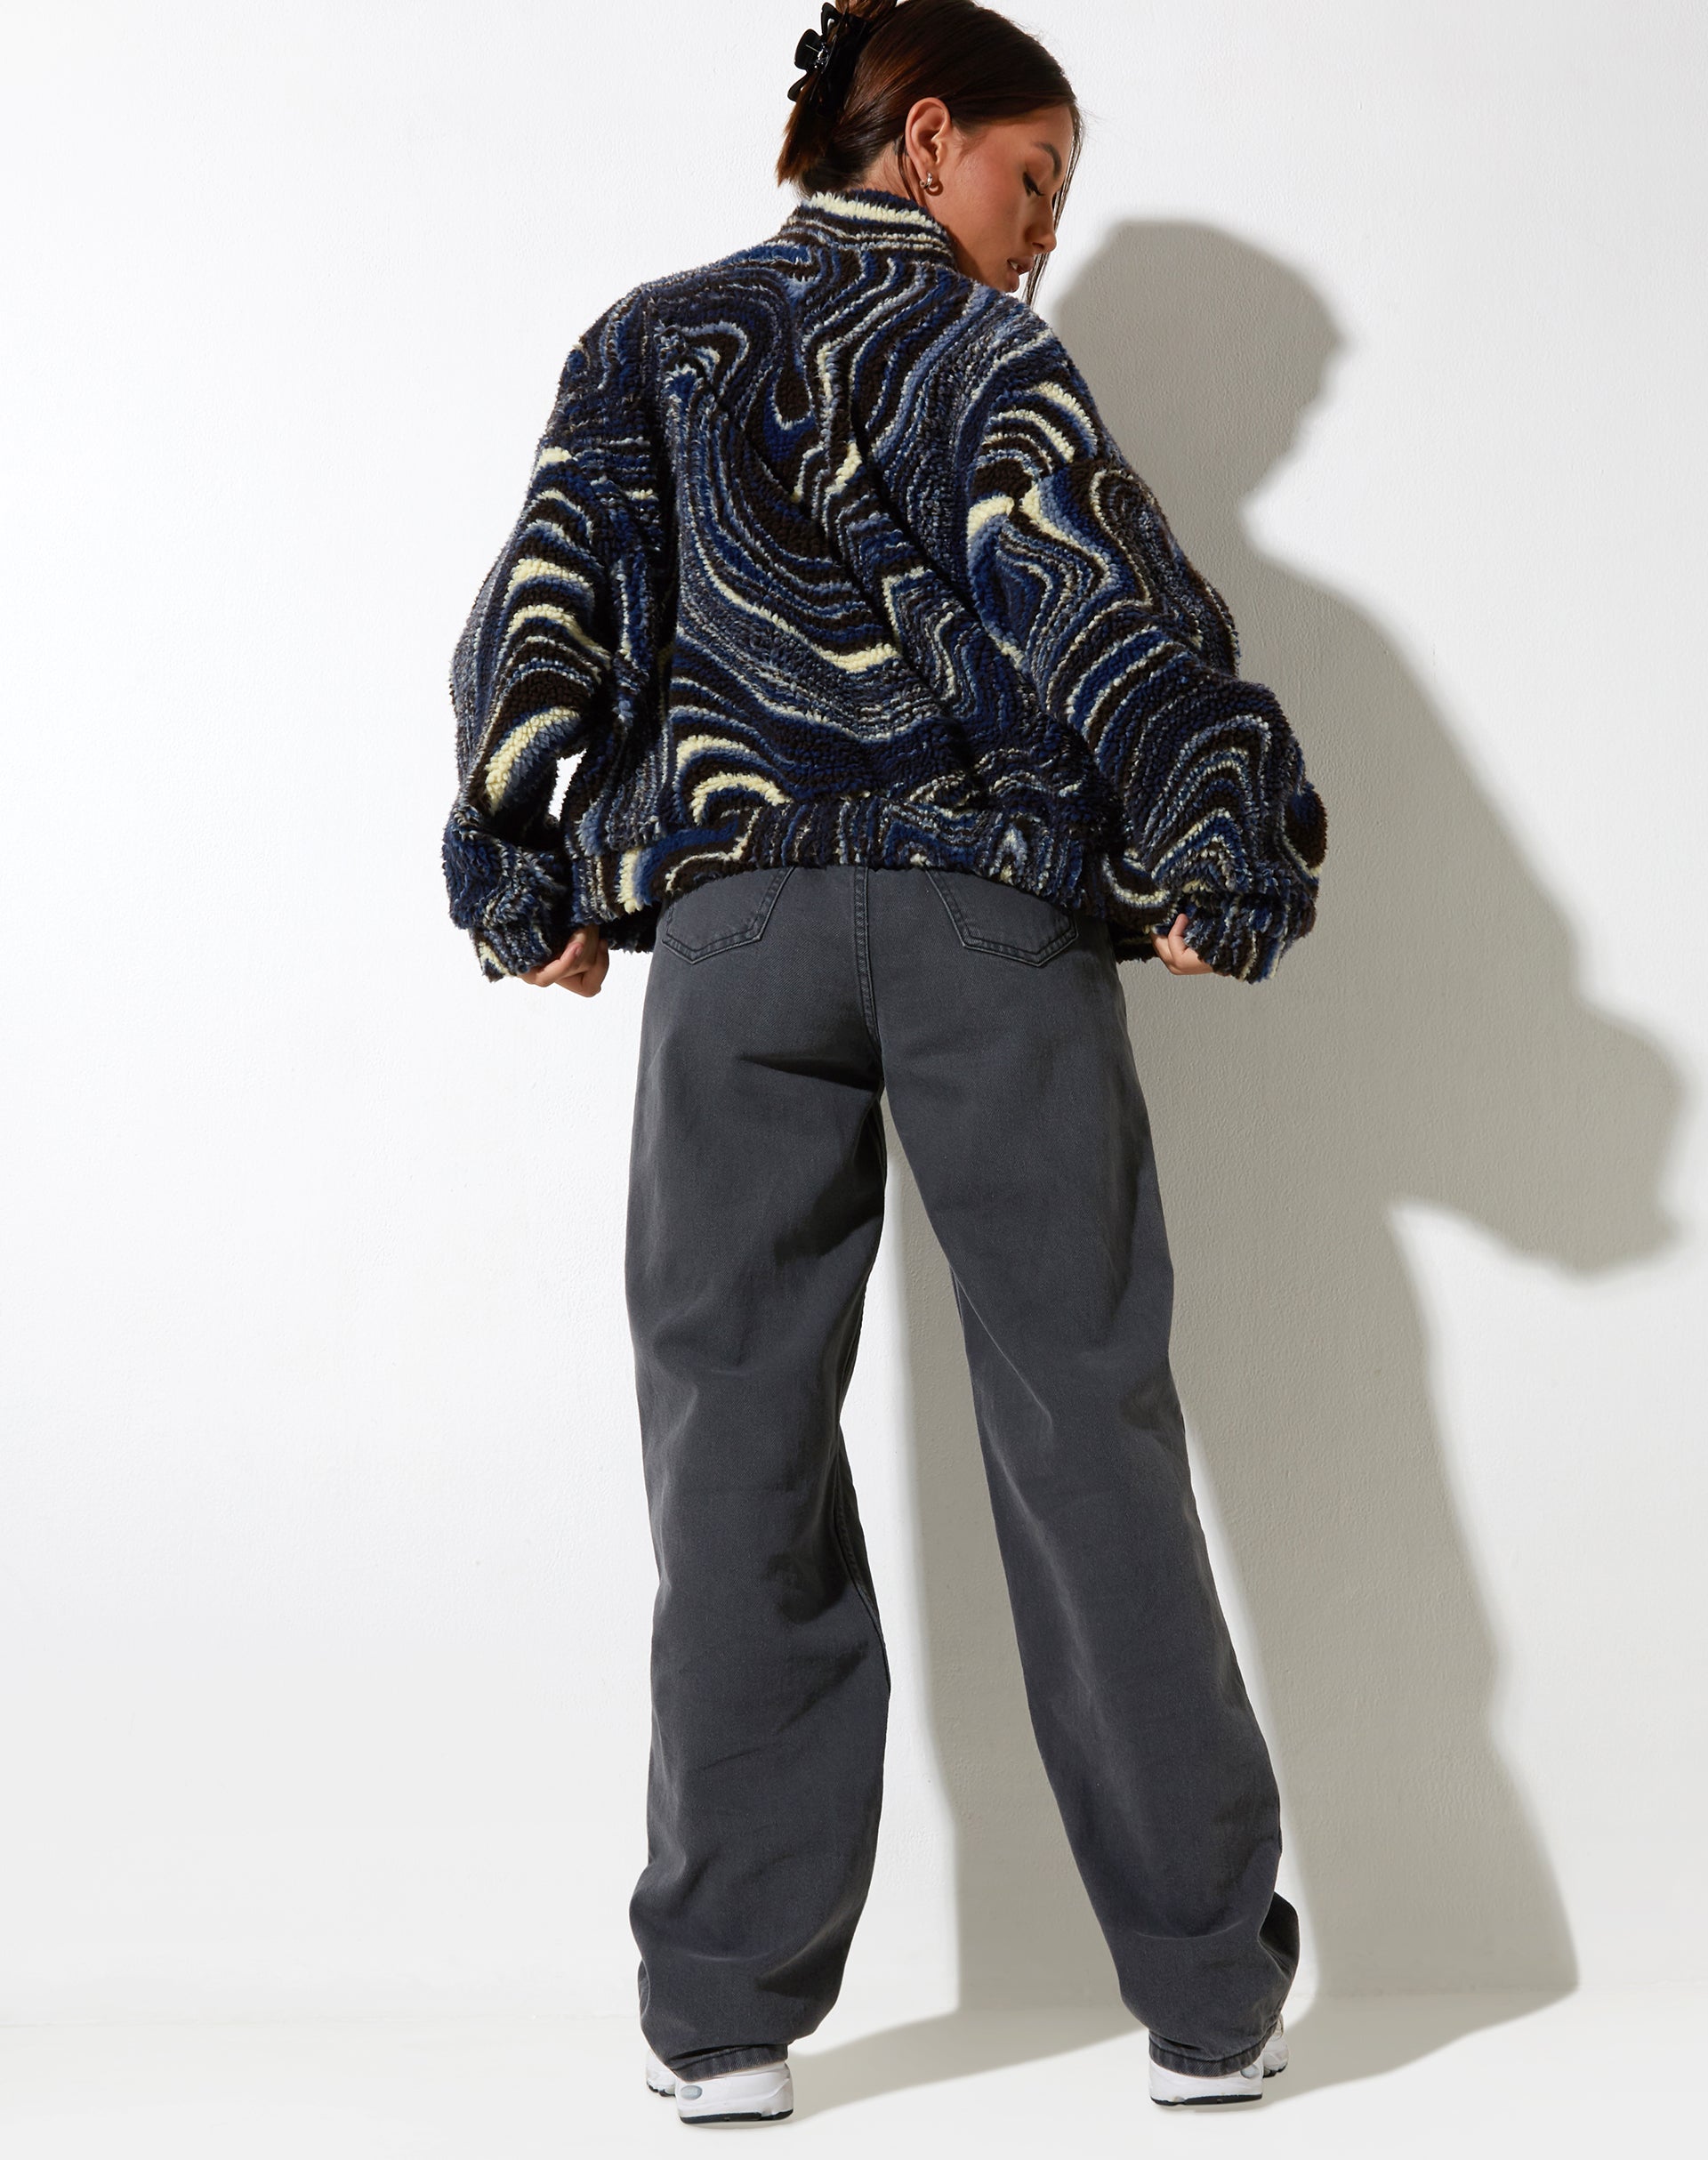 Nereo Jacket in Ripple Blue Black and Ivory